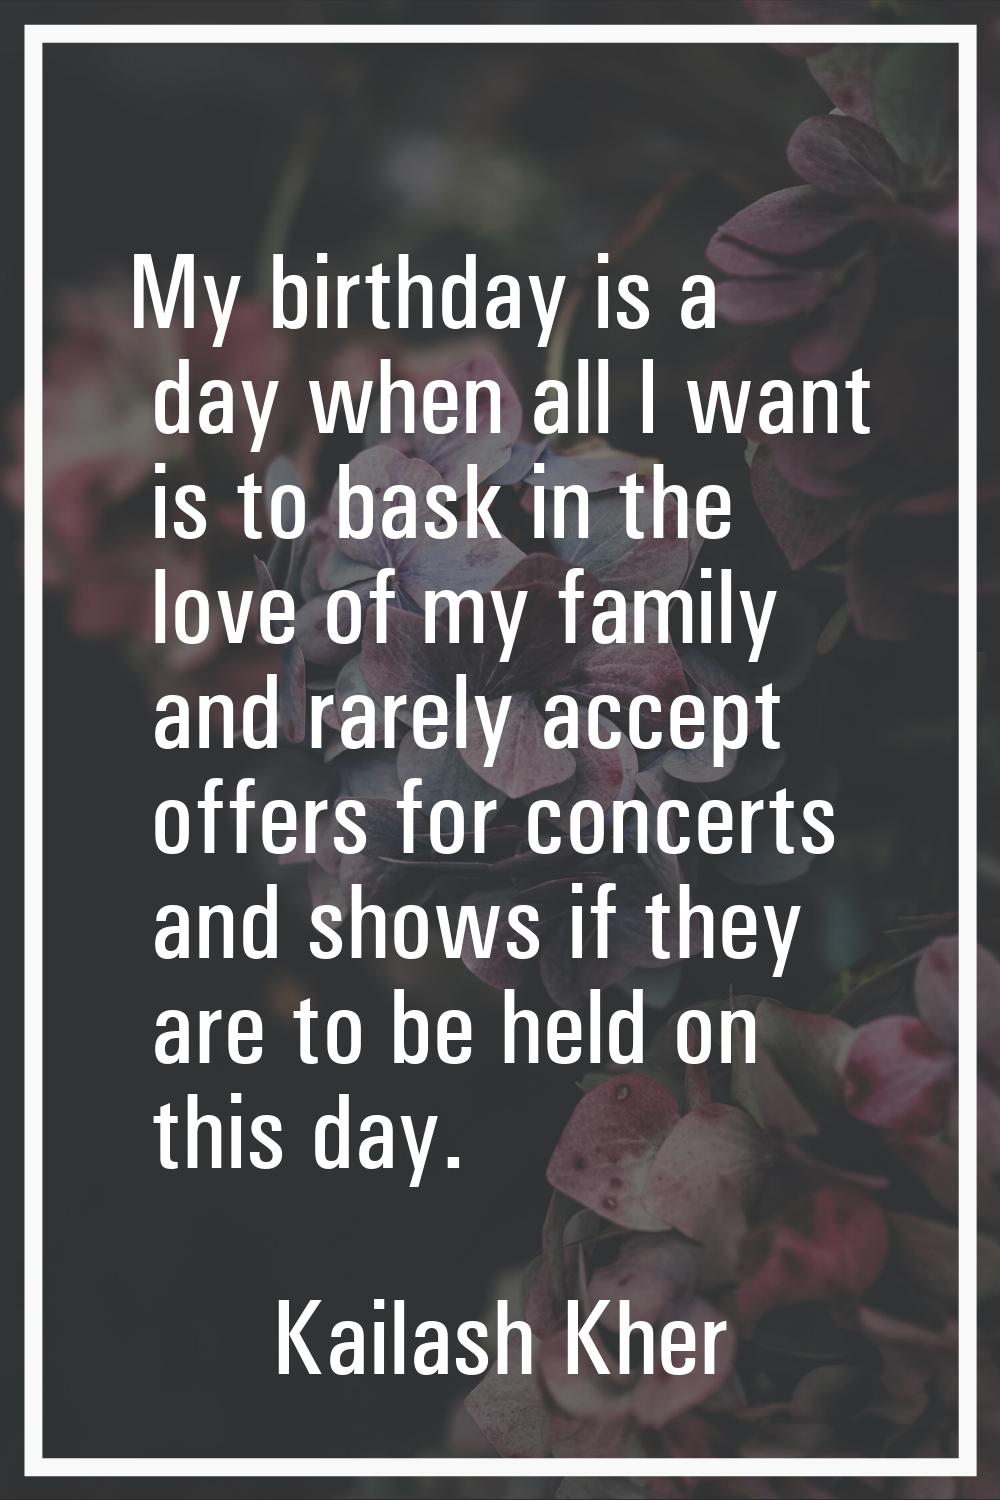 My birthday is a day when all I want is to bask in the love of my family and rarely accept offers f